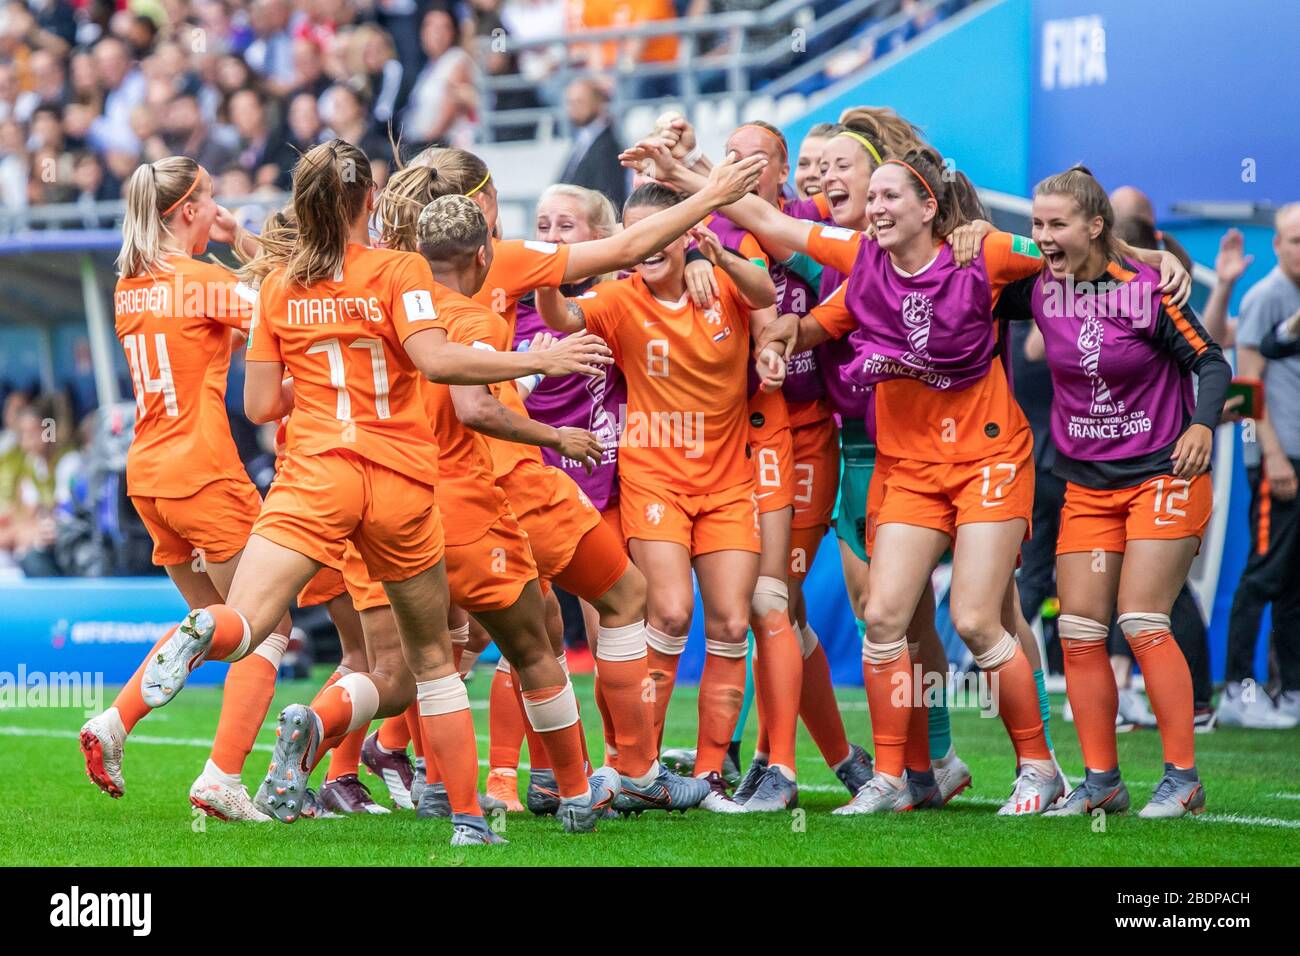 Netherlands women's national football team celebrate during the 2019 FIFA Women's World Cup match between Netherlands and Canada at Stade Auguste-Delaune stadium.(Final score: Netherlands 2:1 Canada) Stock Photo